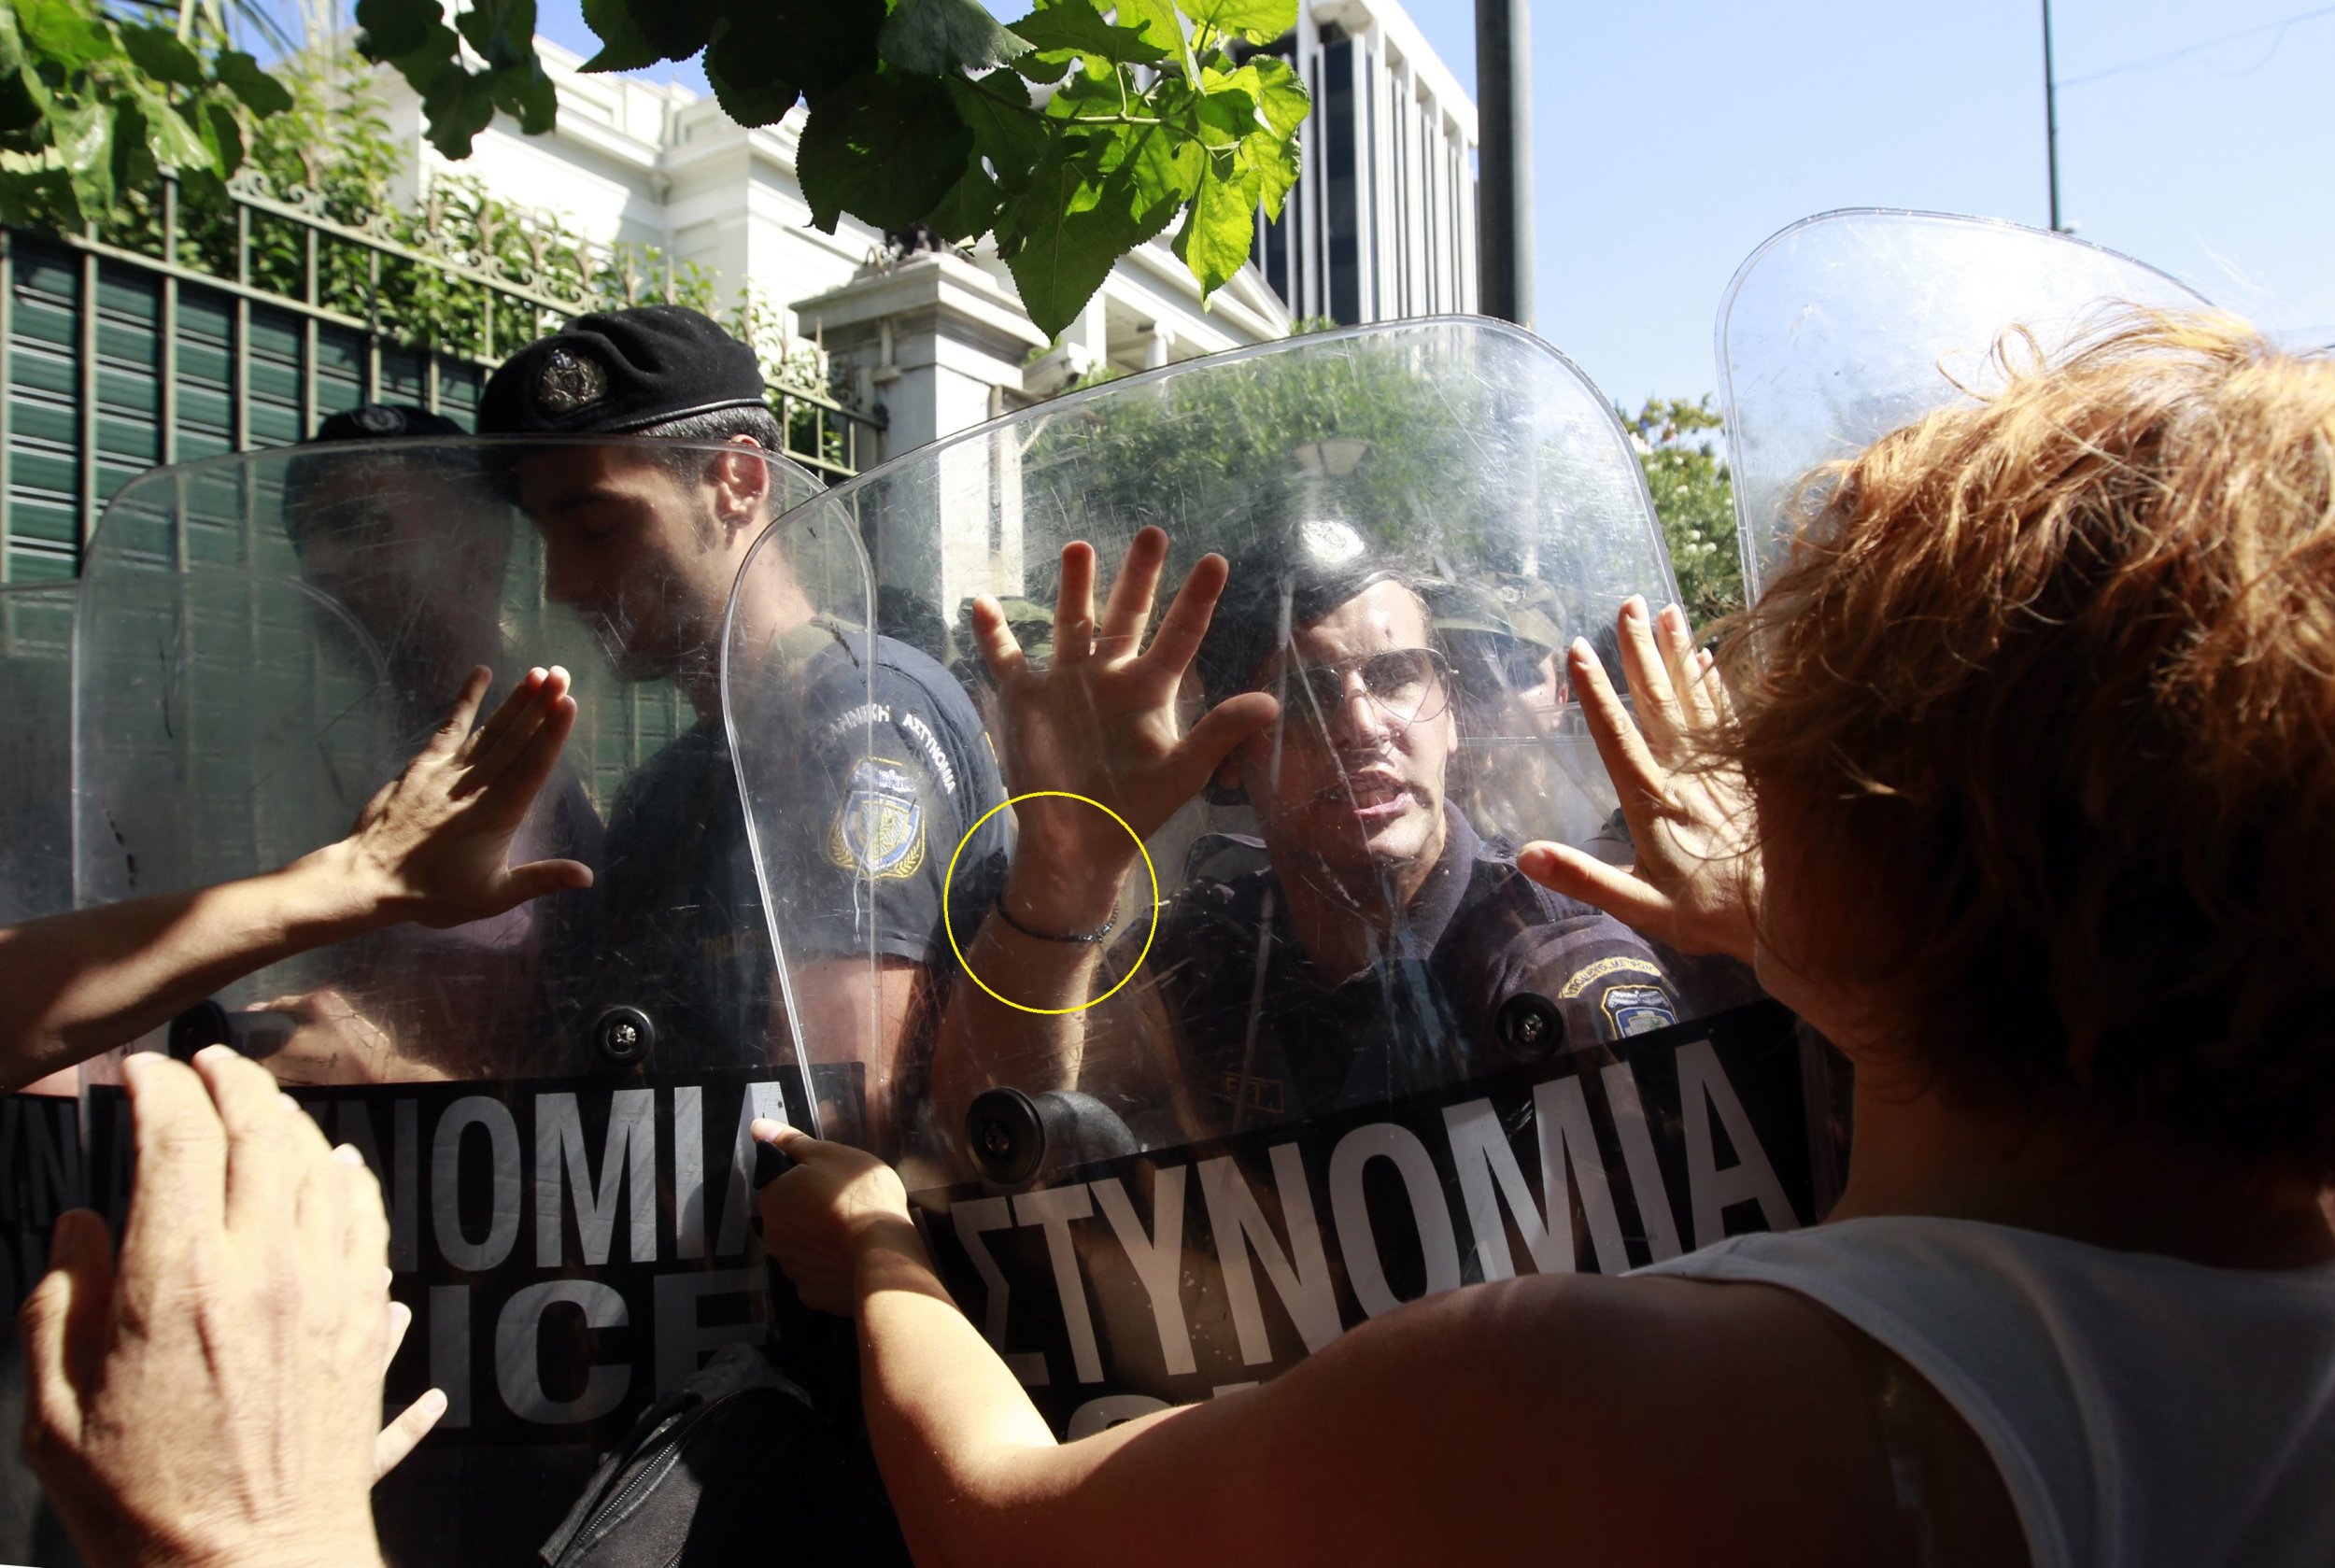 Demonstrators attempt to break through a police cordon during a protest against cuts to services for people with disabilities on September 27.